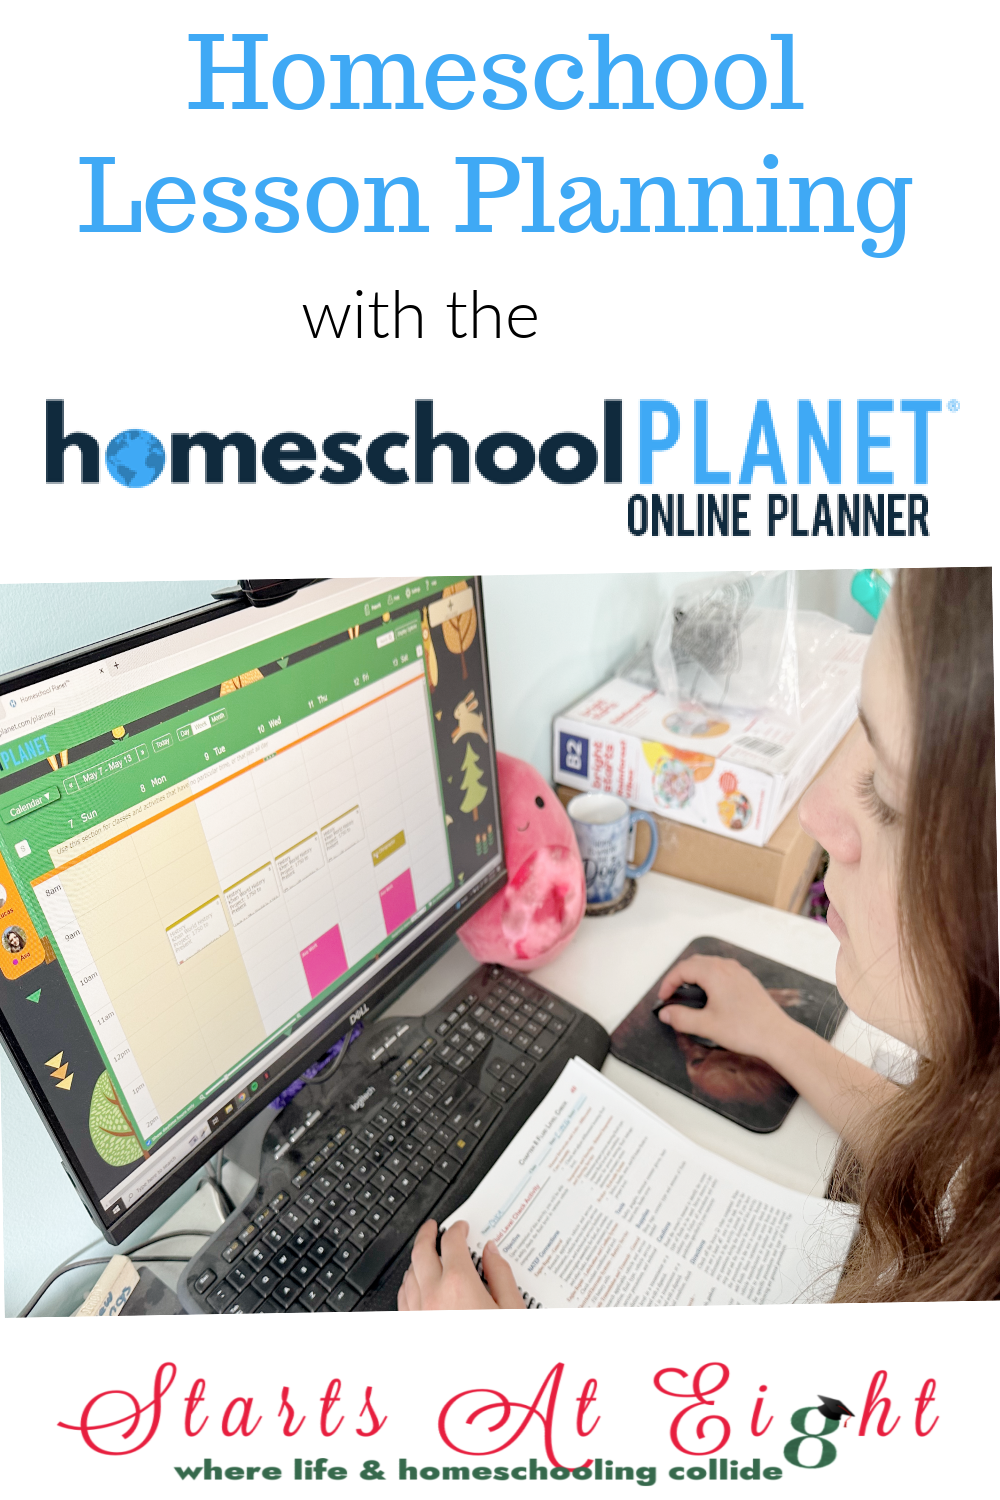 The Homeschool Planet Online Planner not only offers comprehensive homeschool lesson planning, but is a whole family life planner. an use it not only for homeschool lesson planning, but for home, work and school, putting all your scheduling needs in one place!